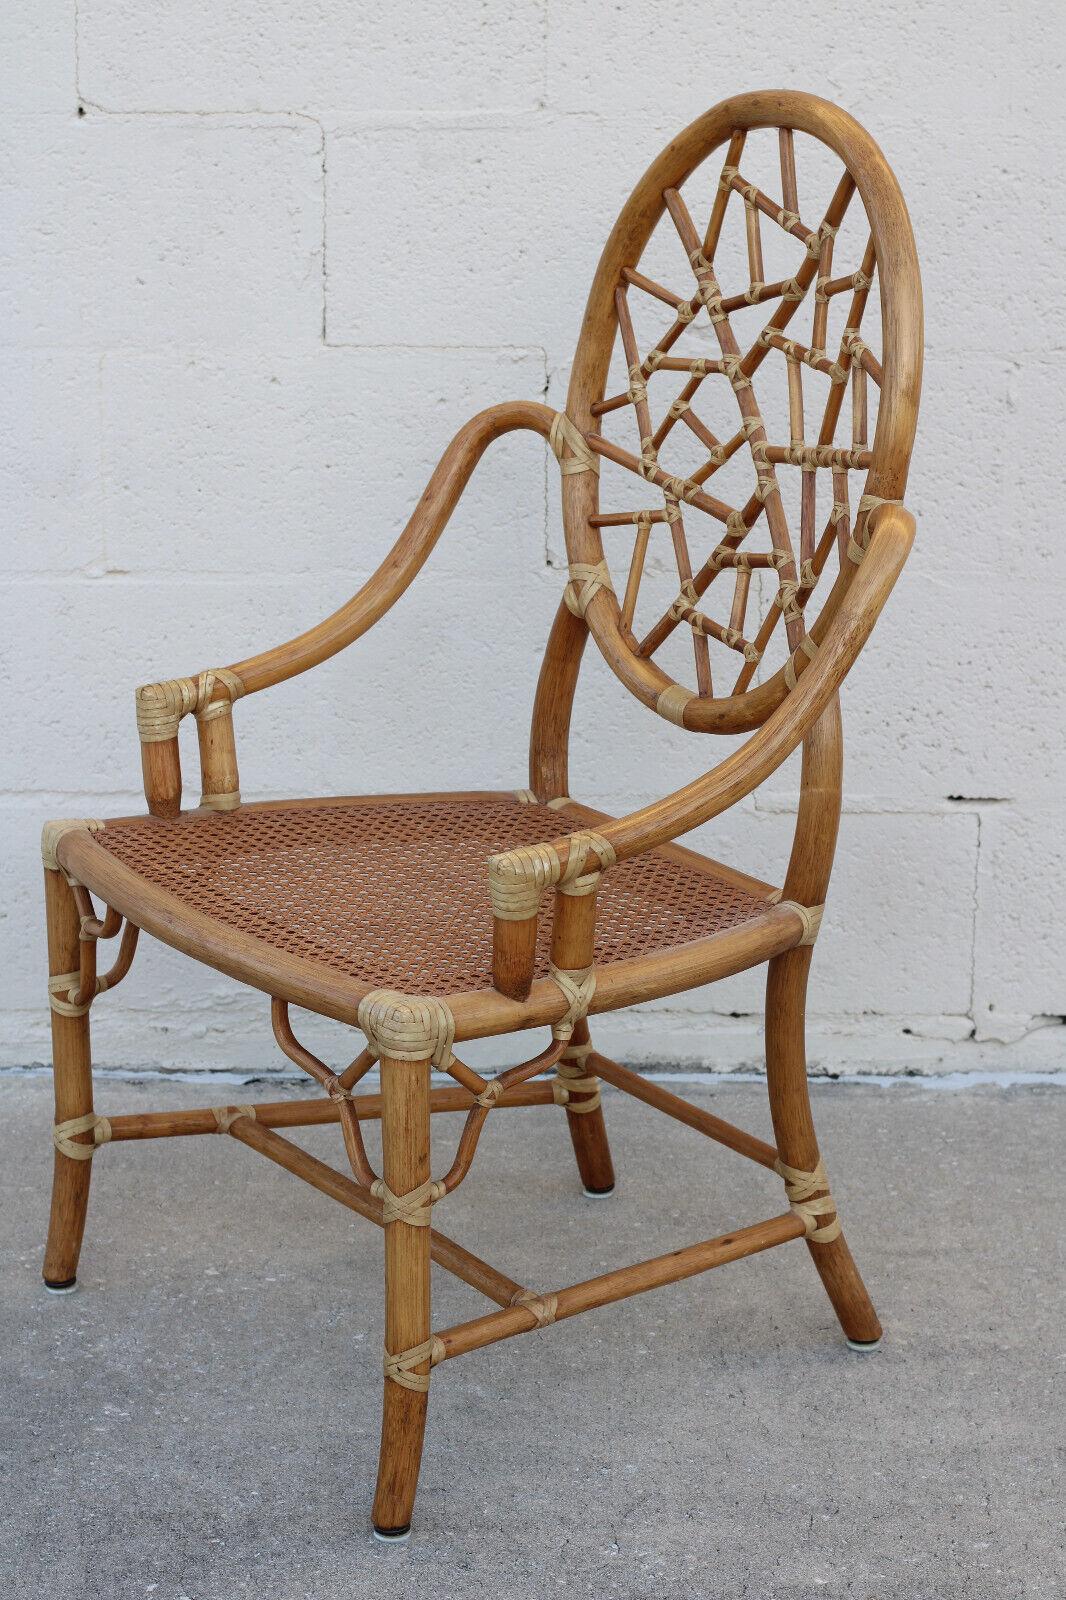 Elinor McGuire Iconic Cracked Ice Dining Chairs, a Set of 6 In Good Condition For Sale In Vero Beach, FL